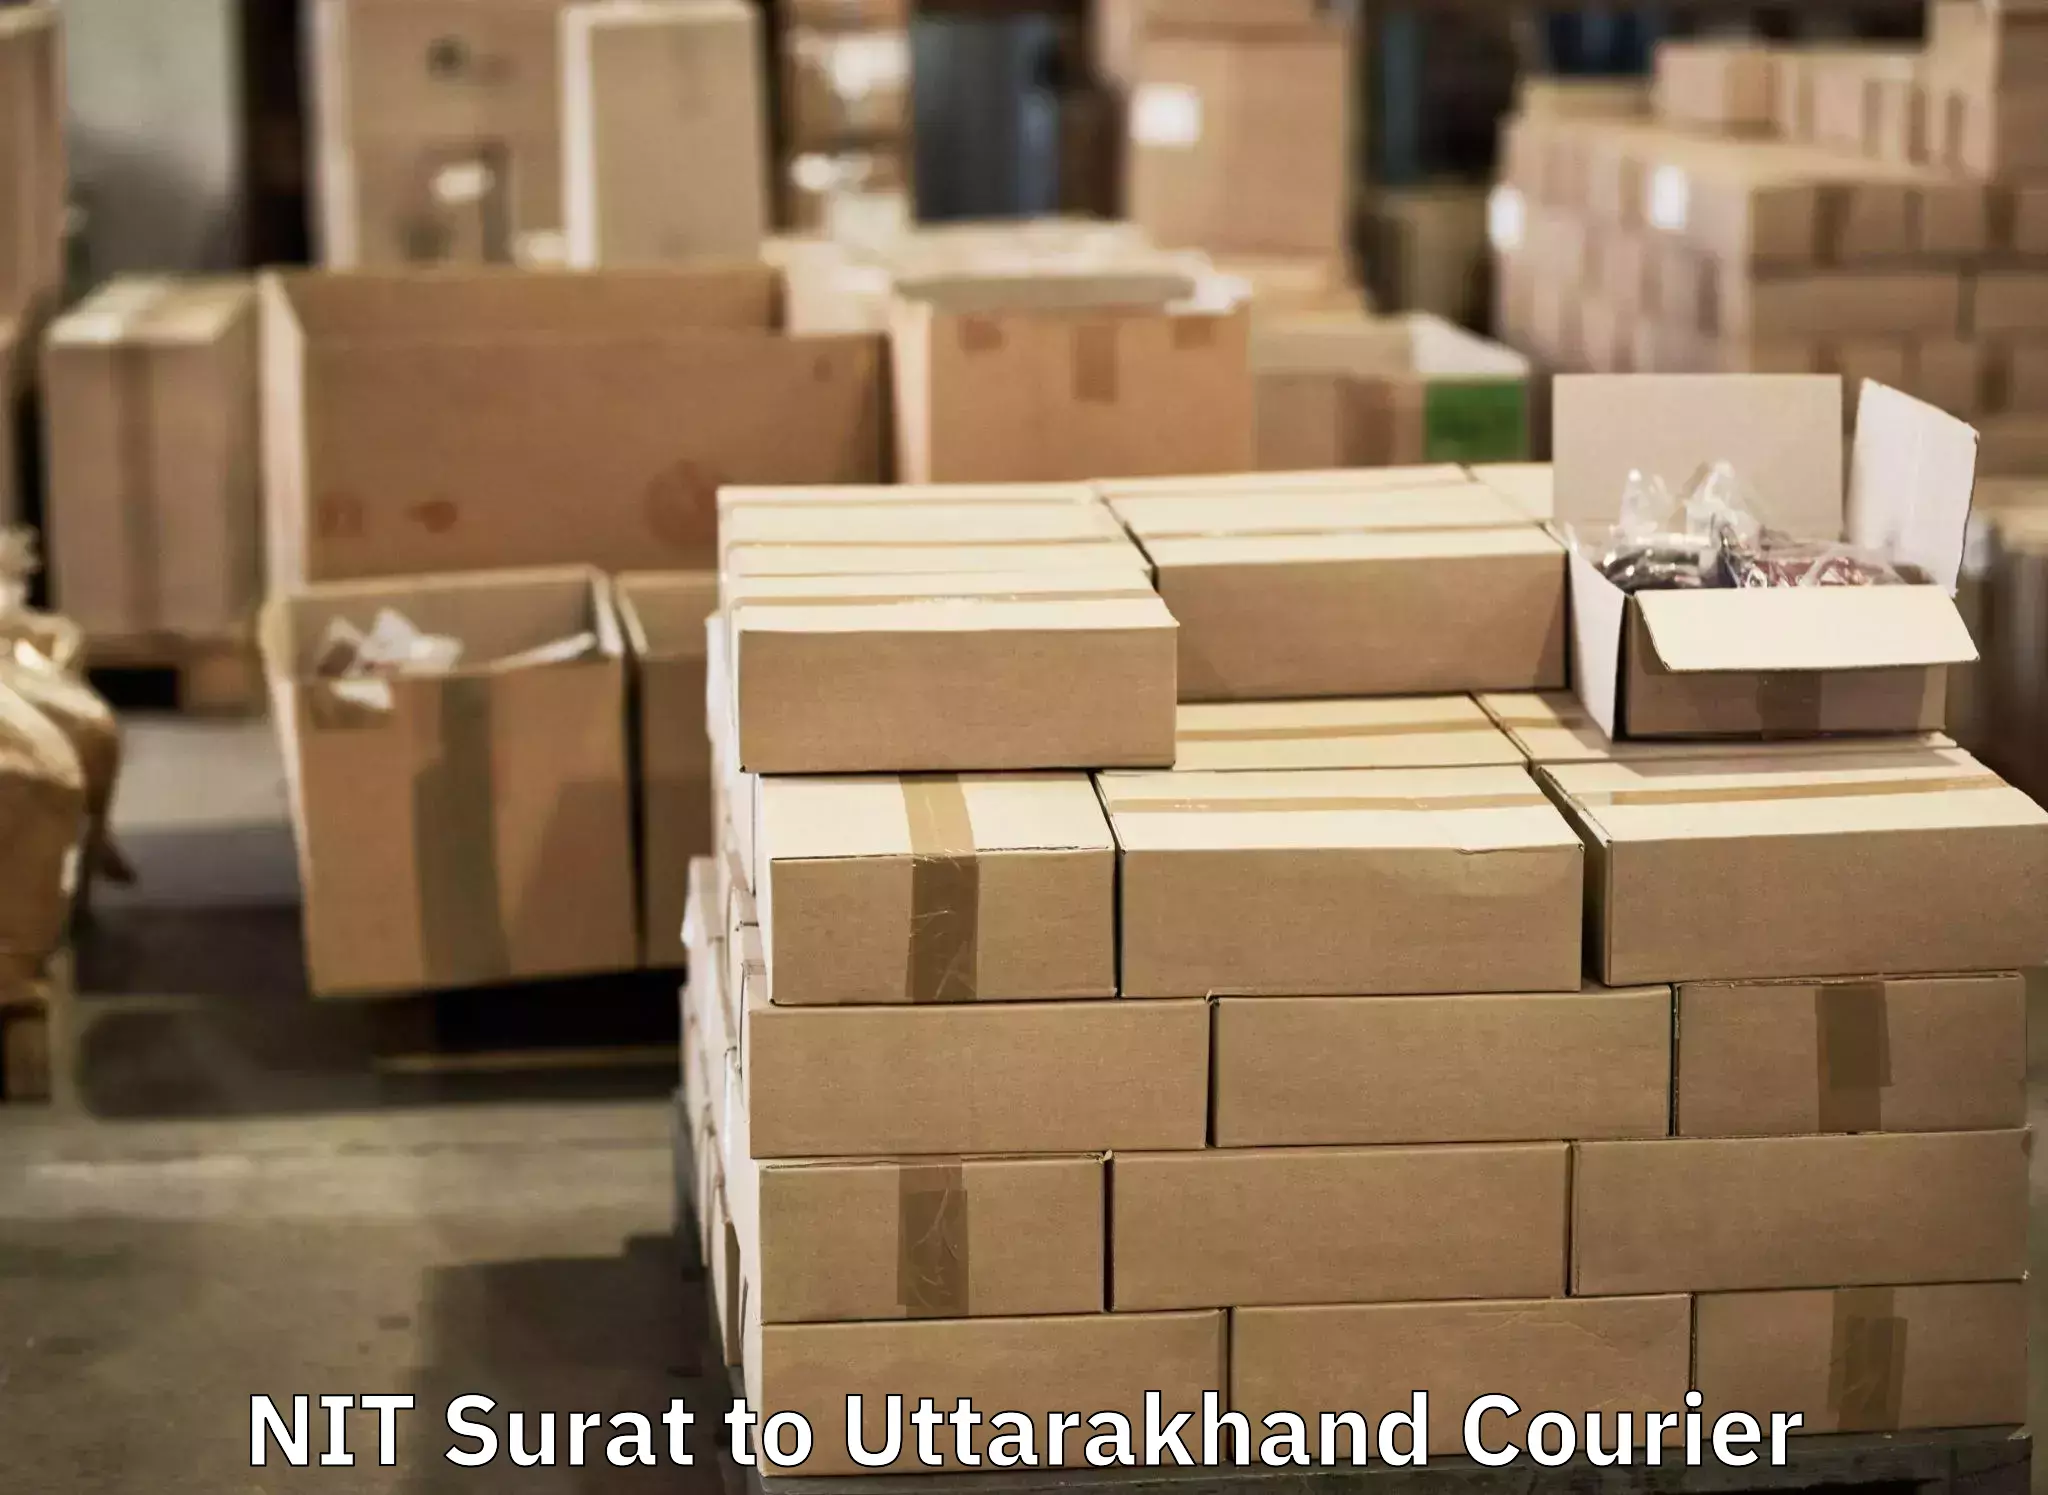 Luggage shipment specialists NIT Surat to Haridwar